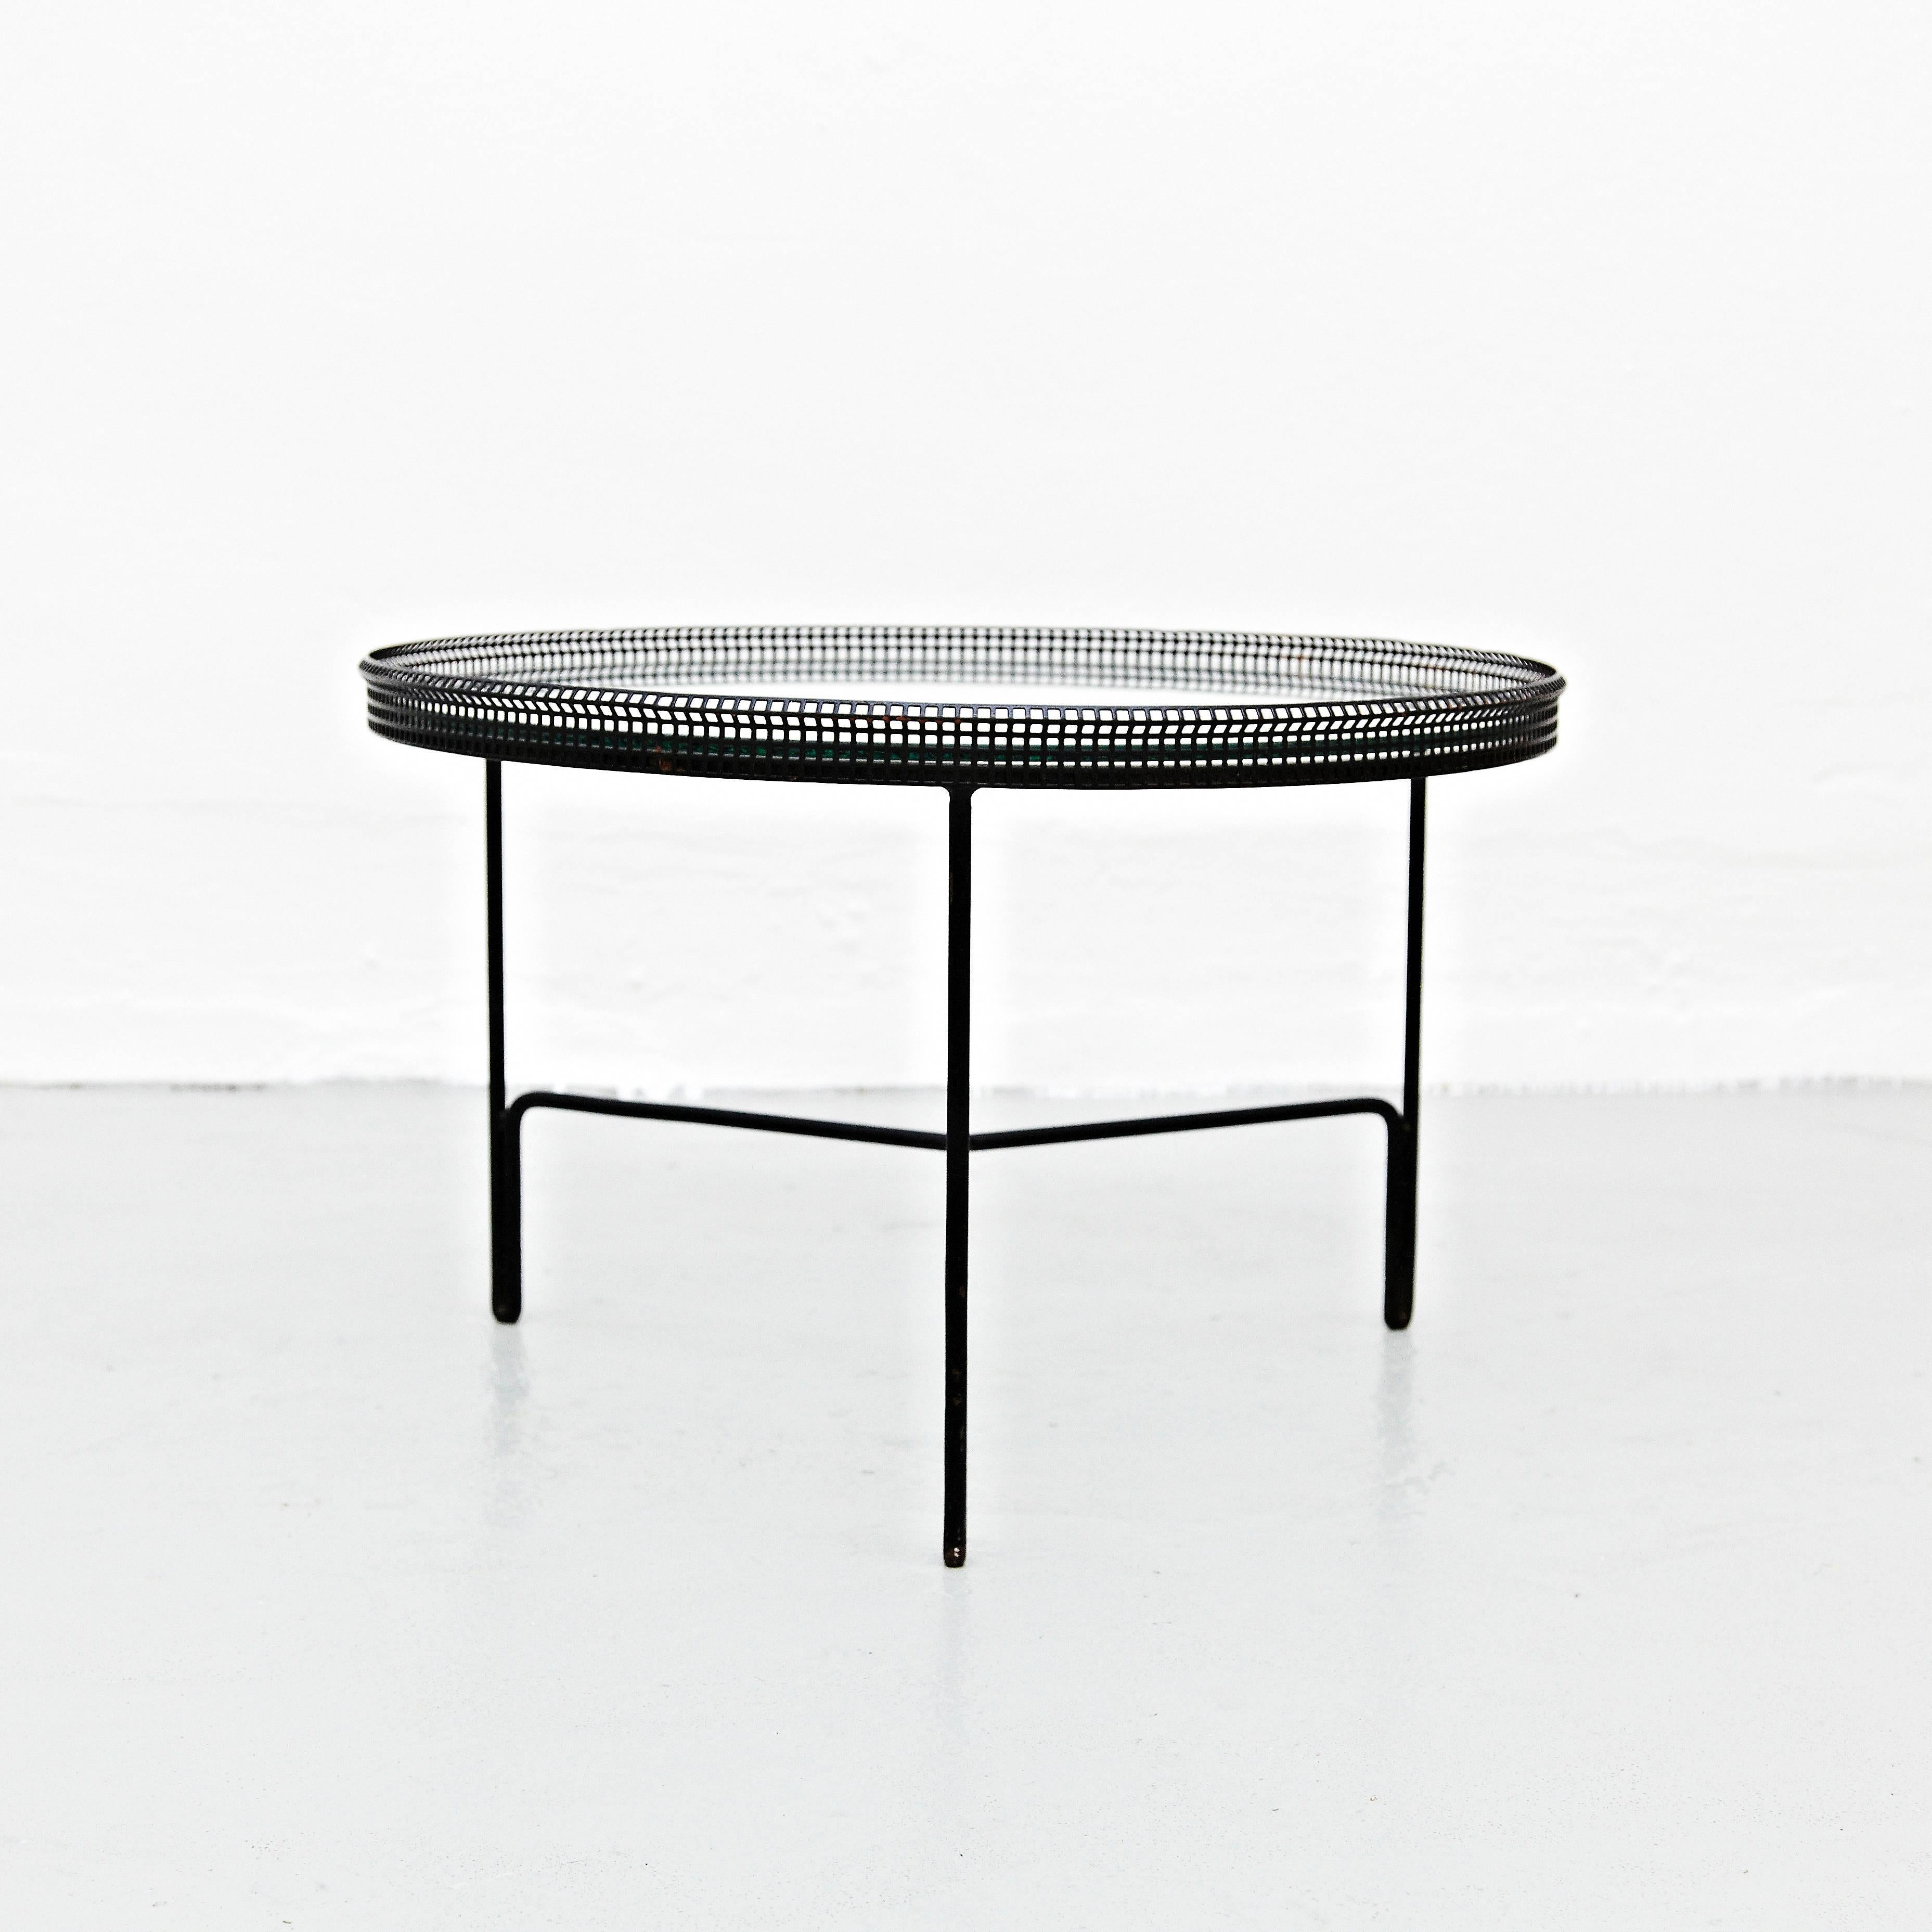 Coffee table designed by Mathieu Matégot.
Manufactured by Ateliers Matégot (France), circa 1950.
Lacquered perforated metal with original paint and glass.

In good original condition, with minor wear consistent with age and use, preserving a